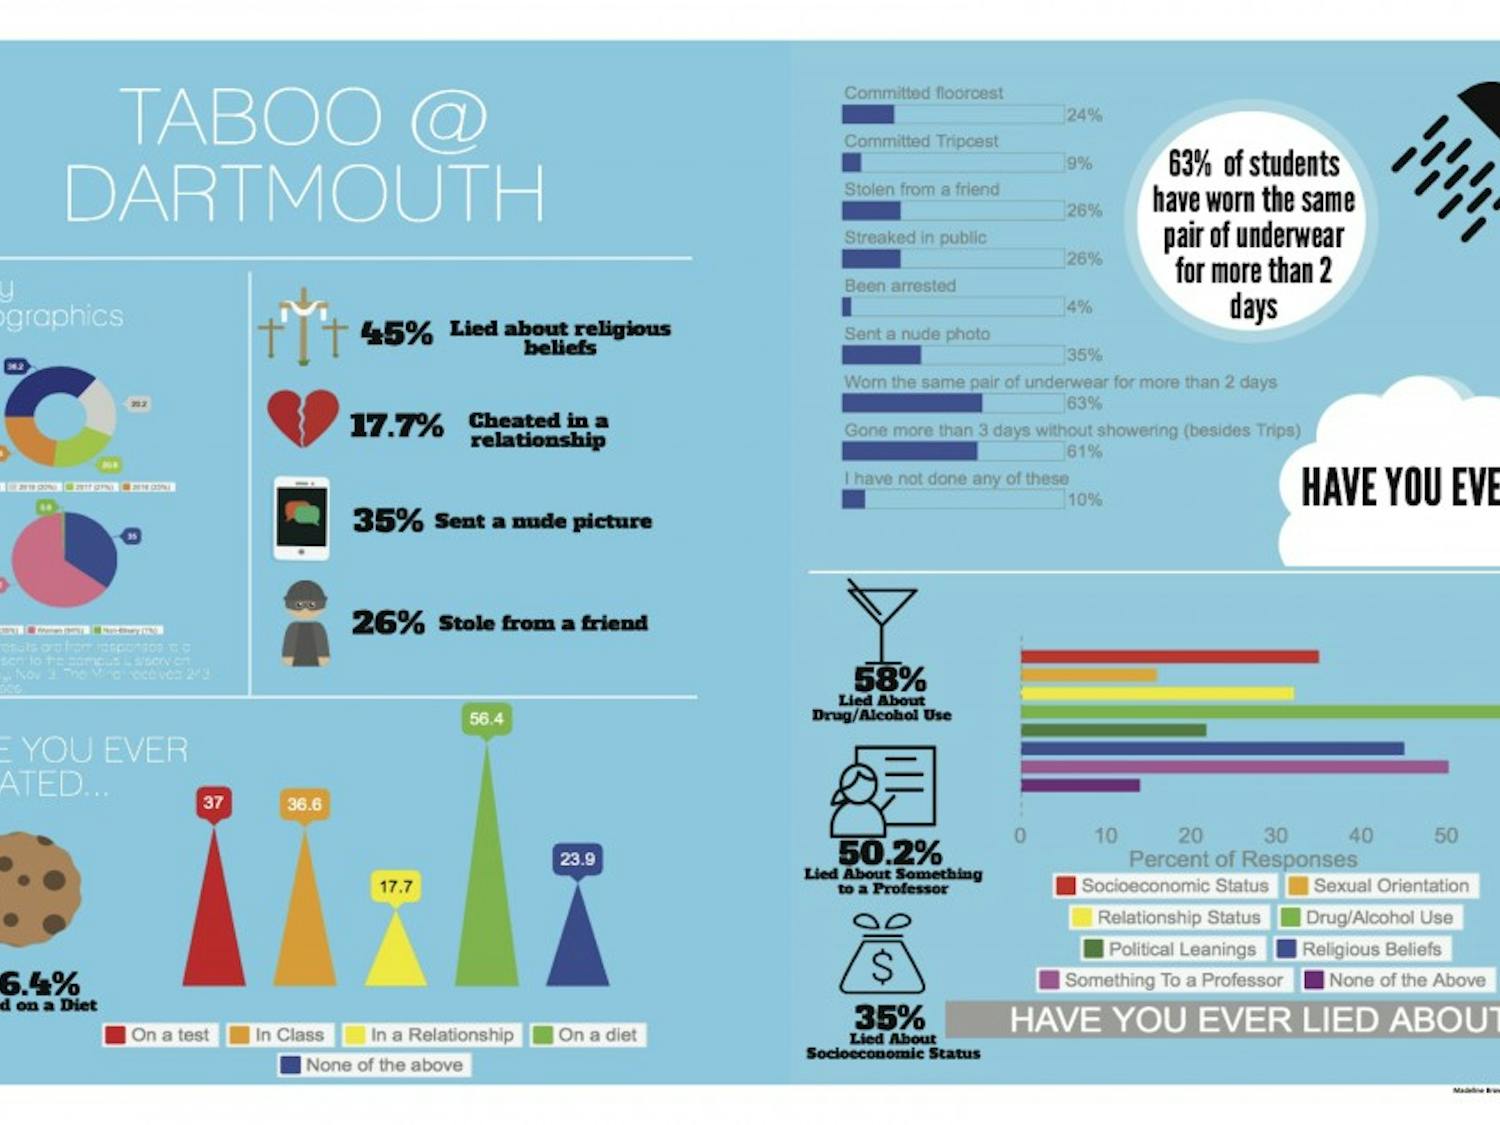 The Dartmouth received 243 responses to our survey on taboos at Dartmouth with questions about sex, crime and hygiene. 